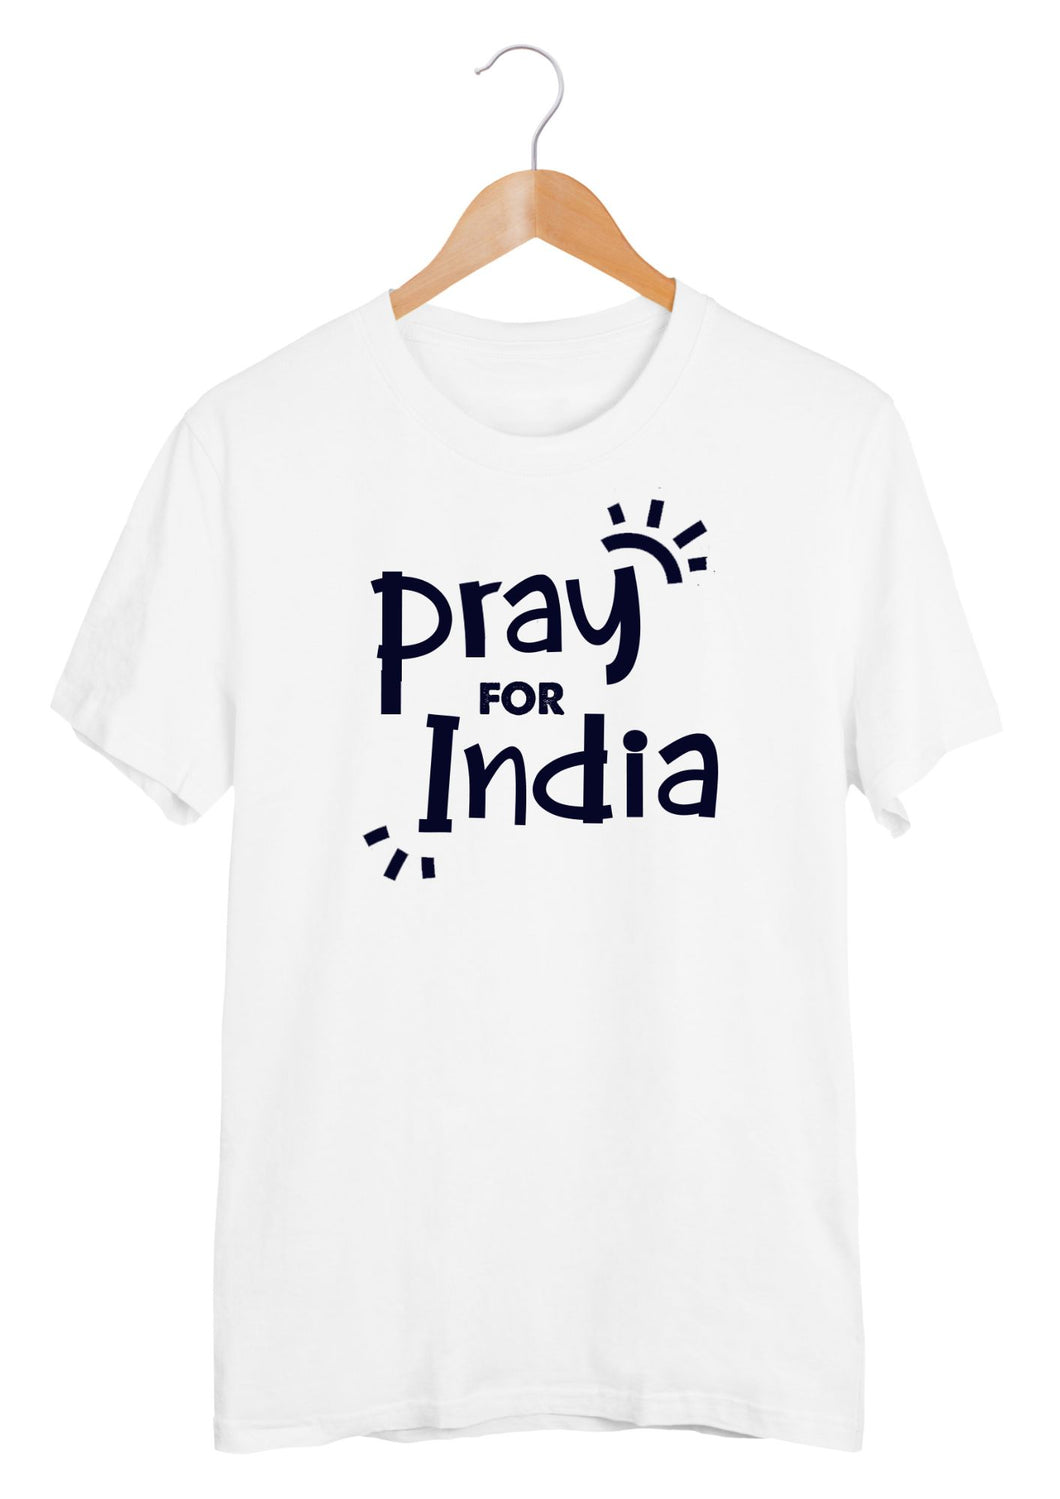 Pray for India